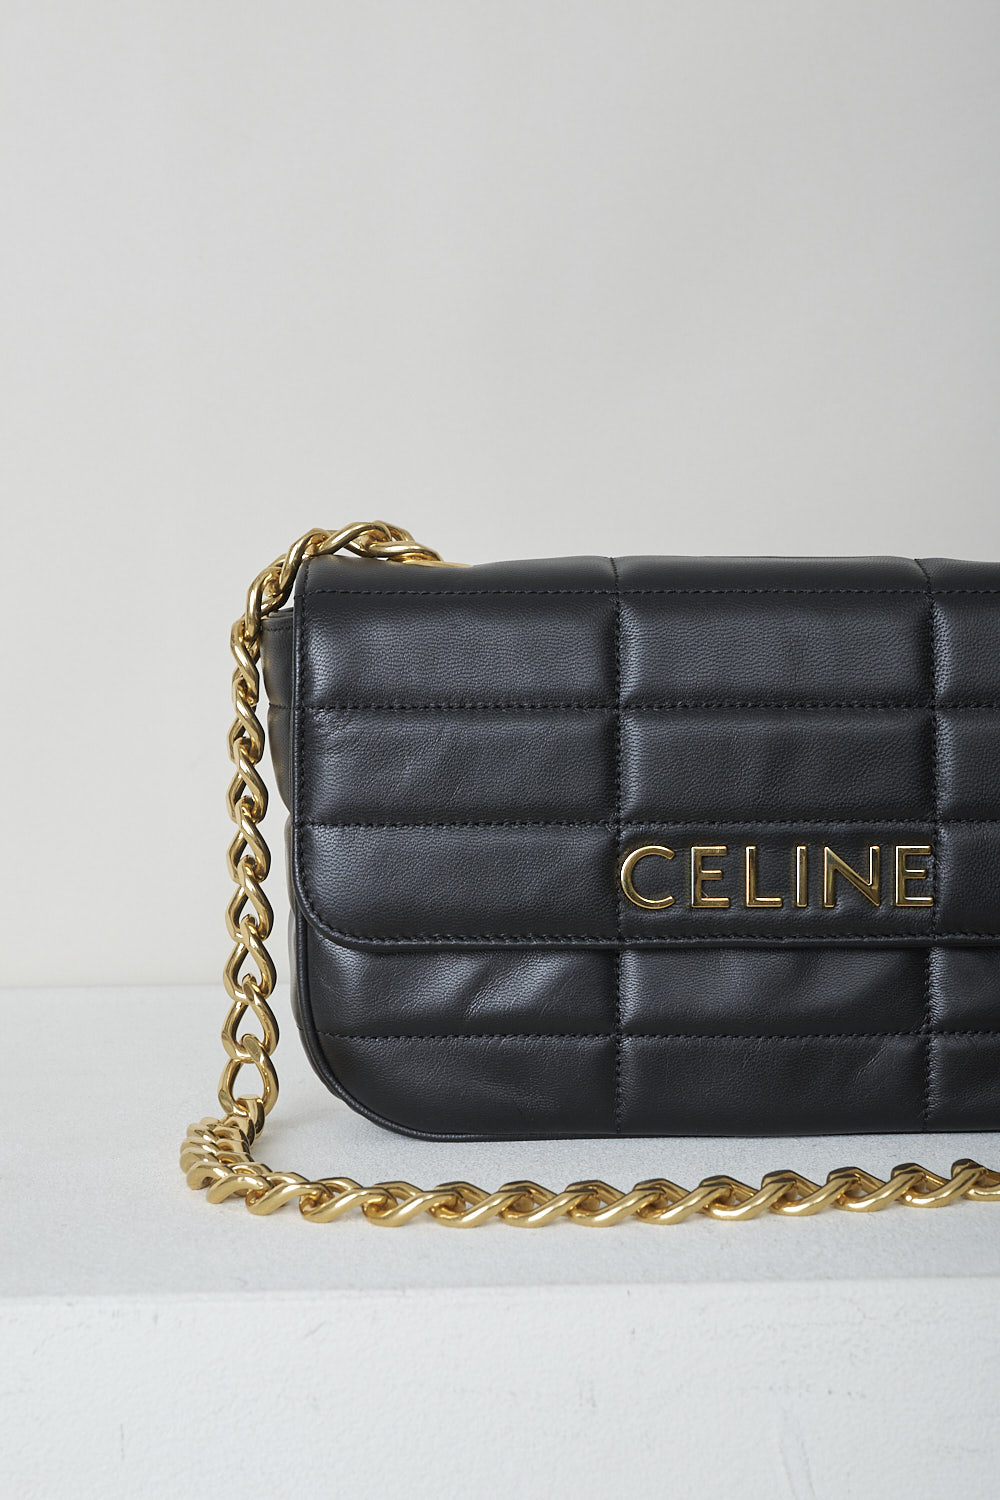 CELINE, BLACK MATELASSÃ‰ SHOULDER BAG WITH GOLD CHAIN, 111273EPZ_38NO, Black, Detail, This black matelassÃ© shoulder bag has gold-tone metal hardware with the brand's lettering on the front and a gold chain shoulder strap. The bag has a snap button closure. The flap opens to the main compartment with a inner pocket to the backside


